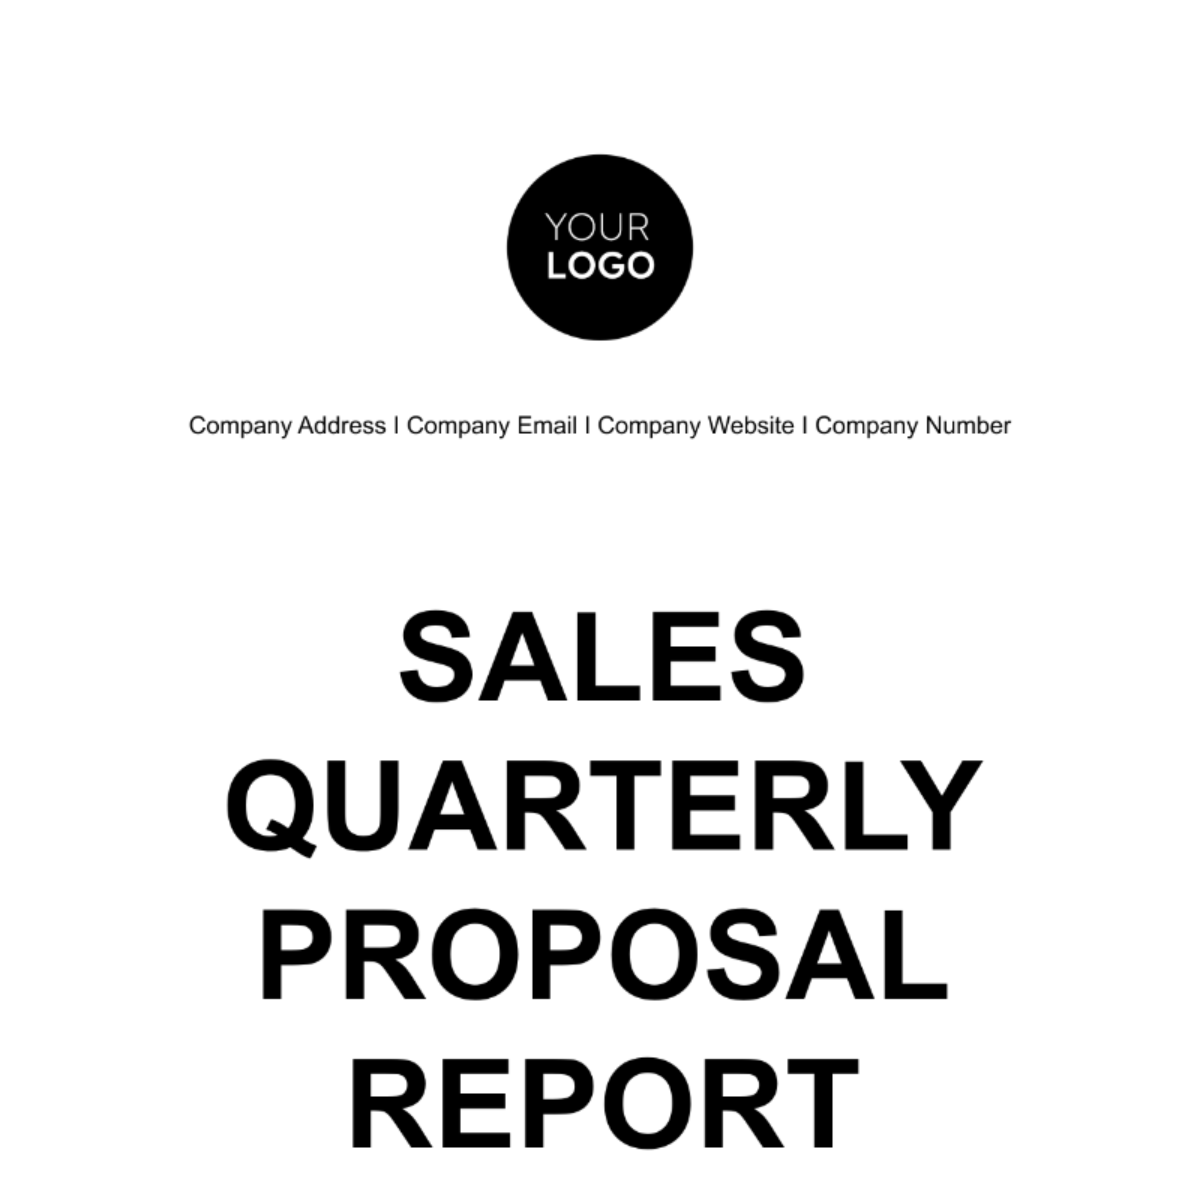 Sales Quarterly Proposal Report Template